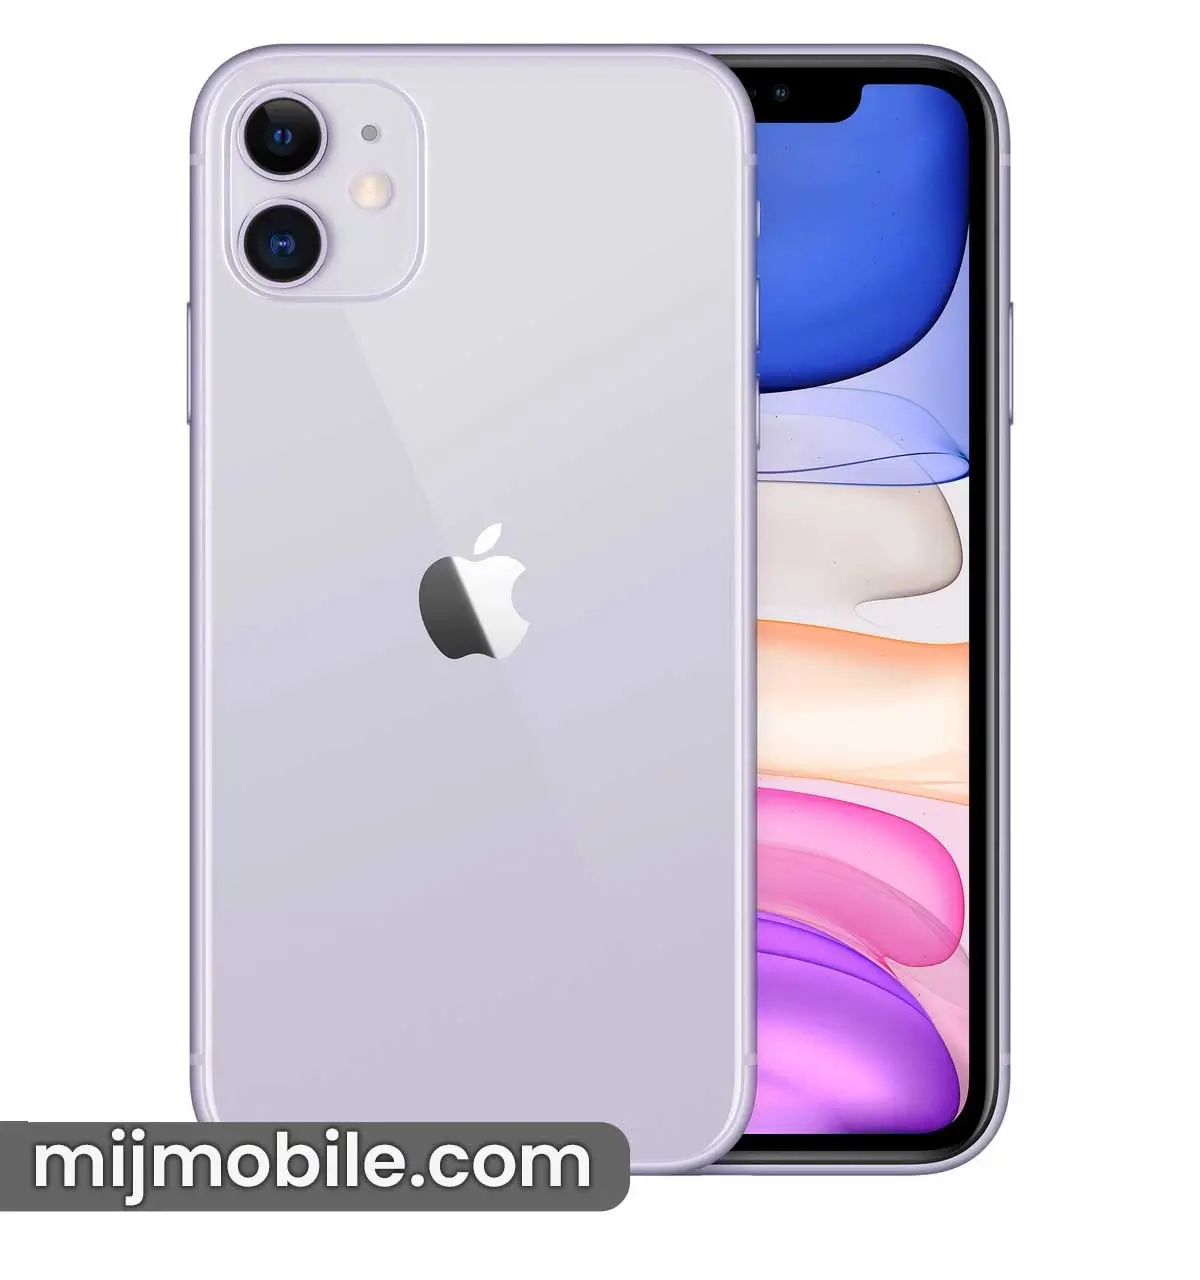 Apple iPhone 11 Price in Pakistan & Specifications